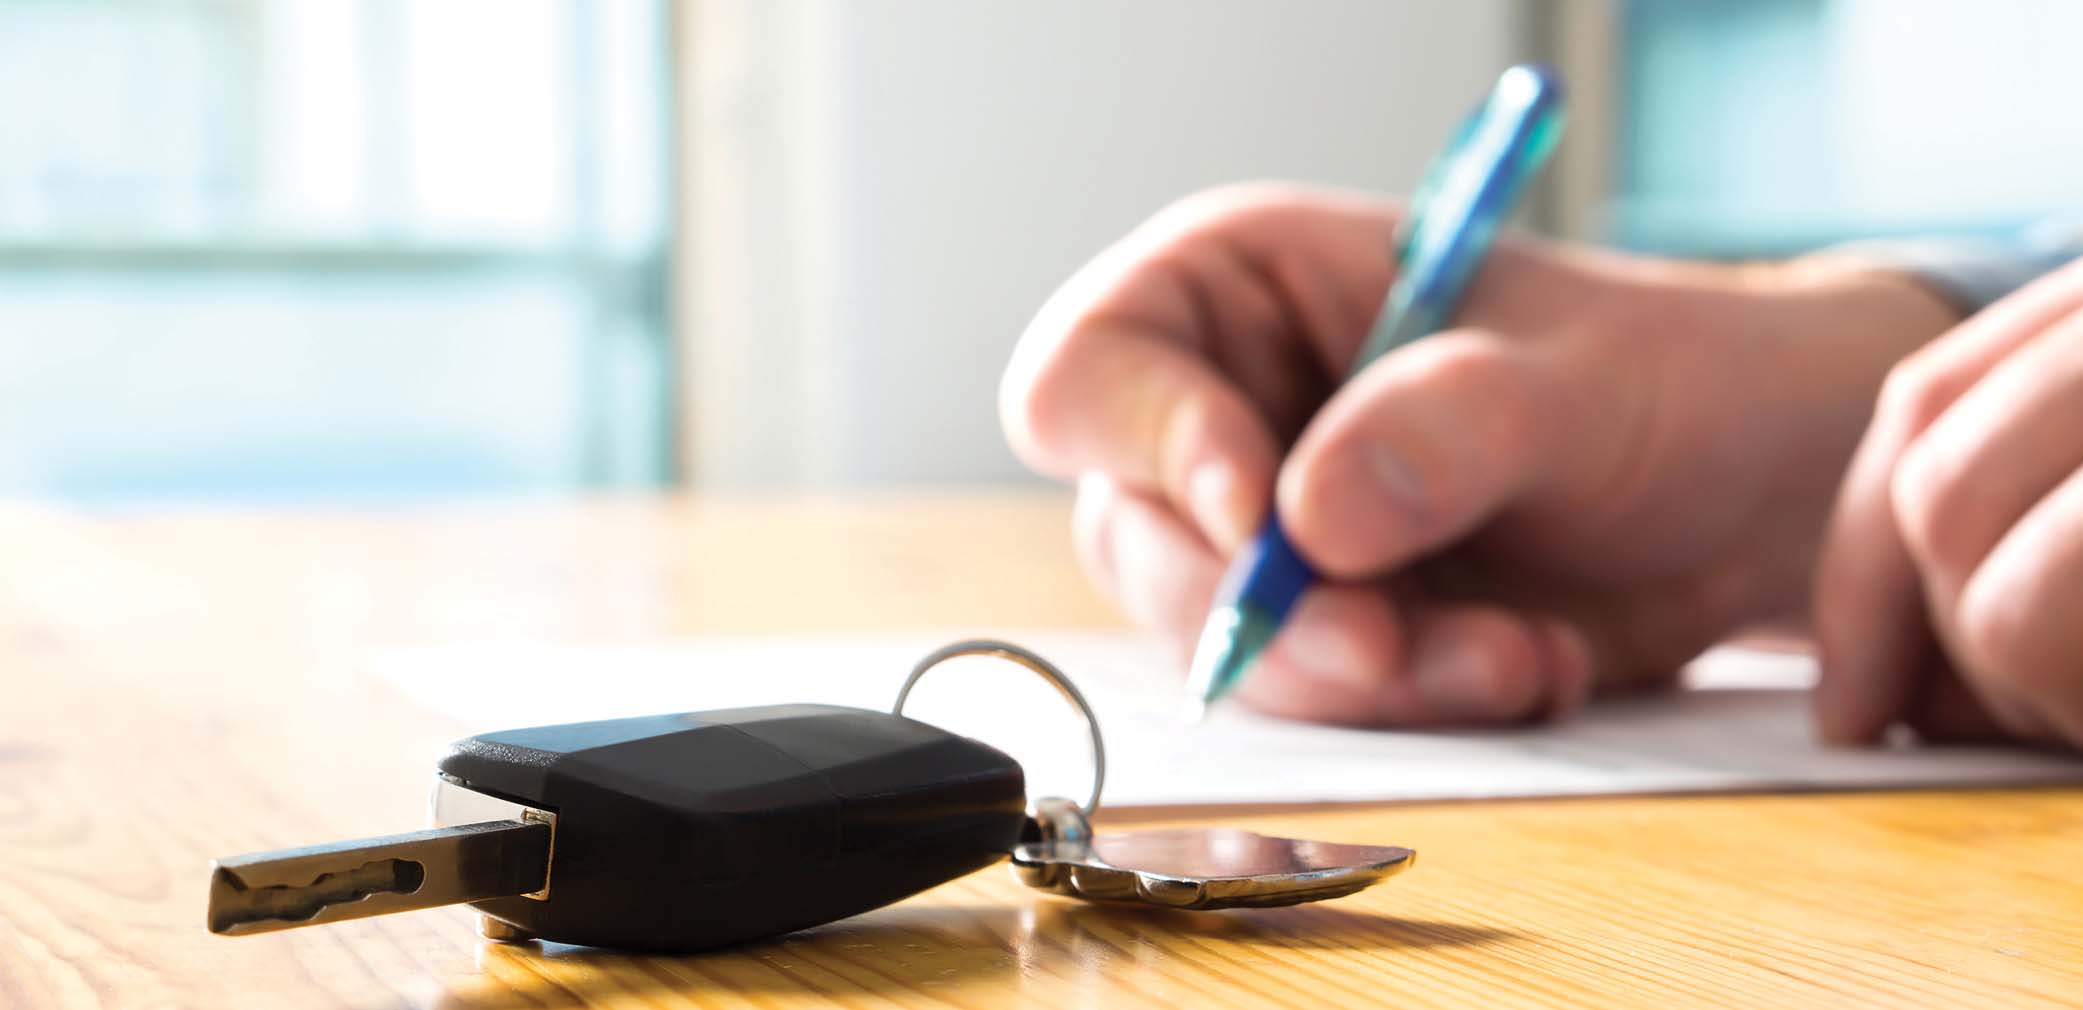 signing contract paperwork with automobile keys